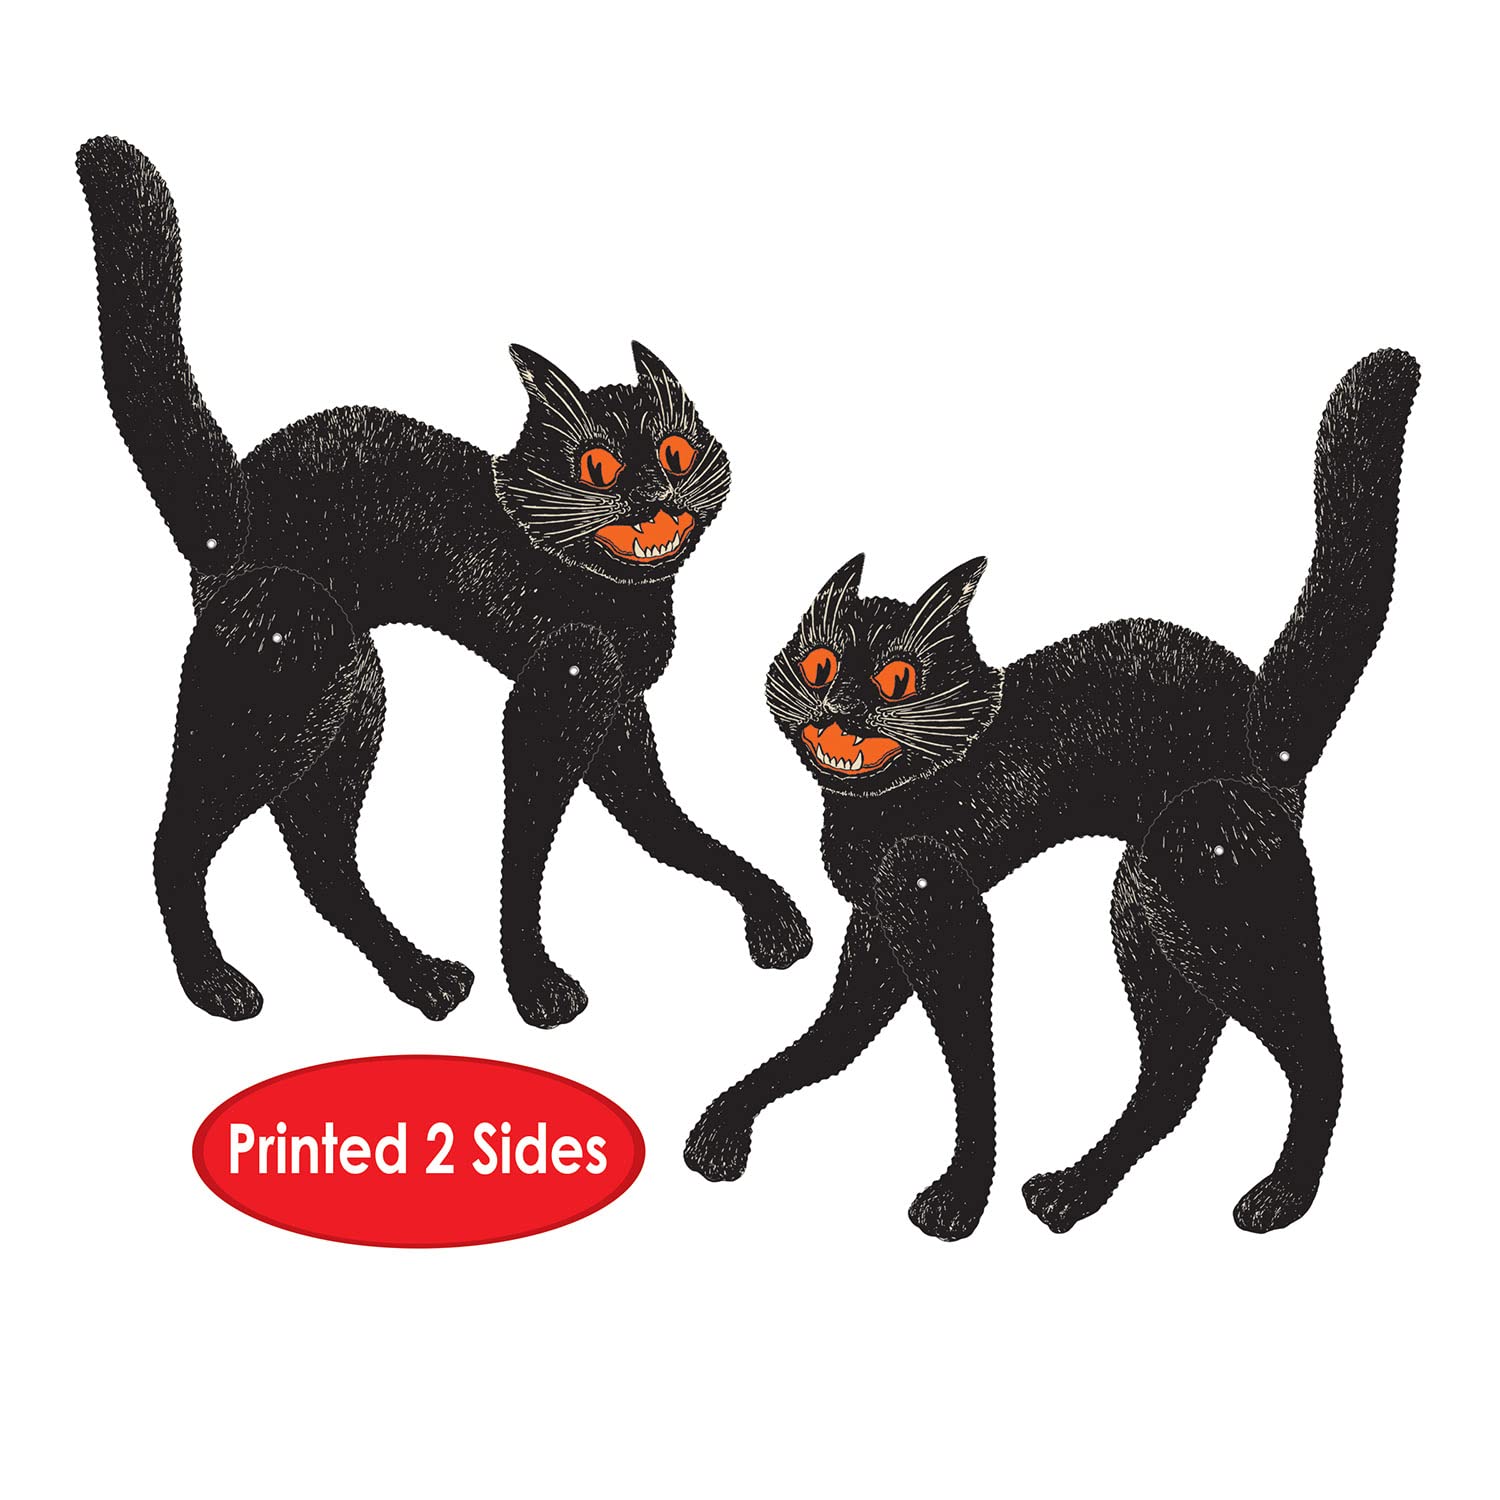 Jointed Scratch Cat - Black